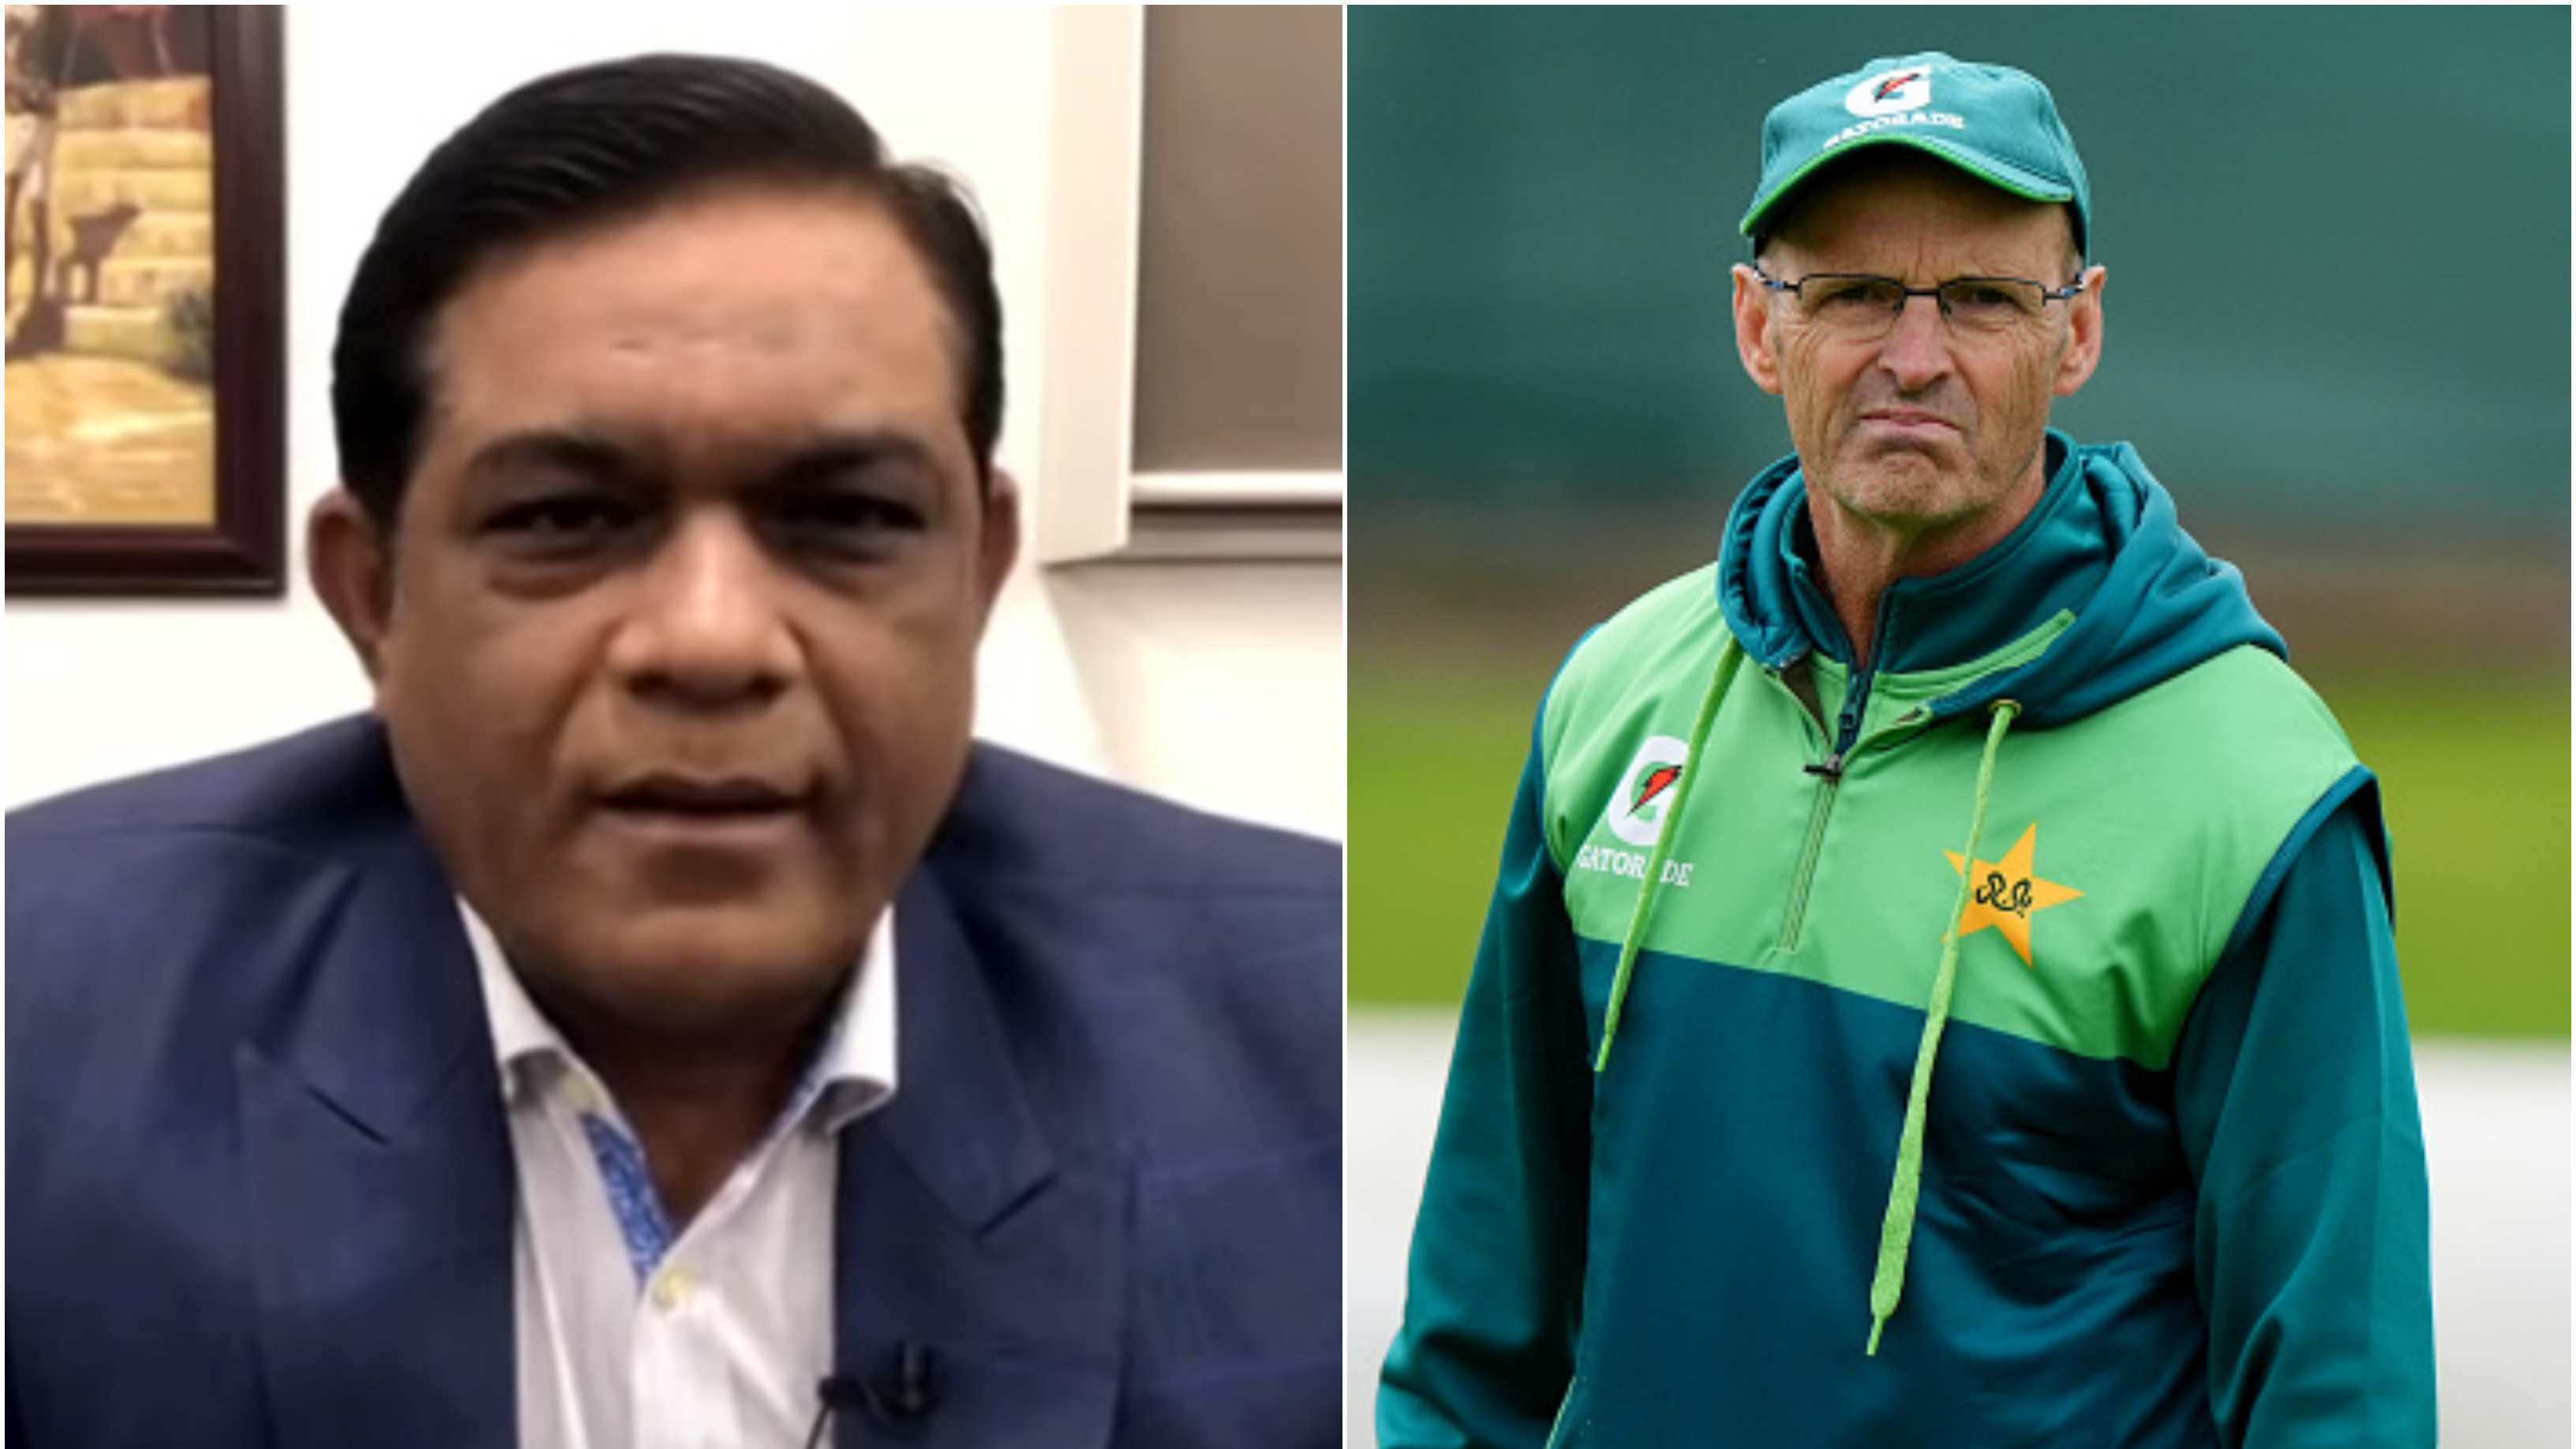 “He joined the team after IPL”: Rashid Latif questions timing of Gary Kirsten's appointment as Pakistan coach